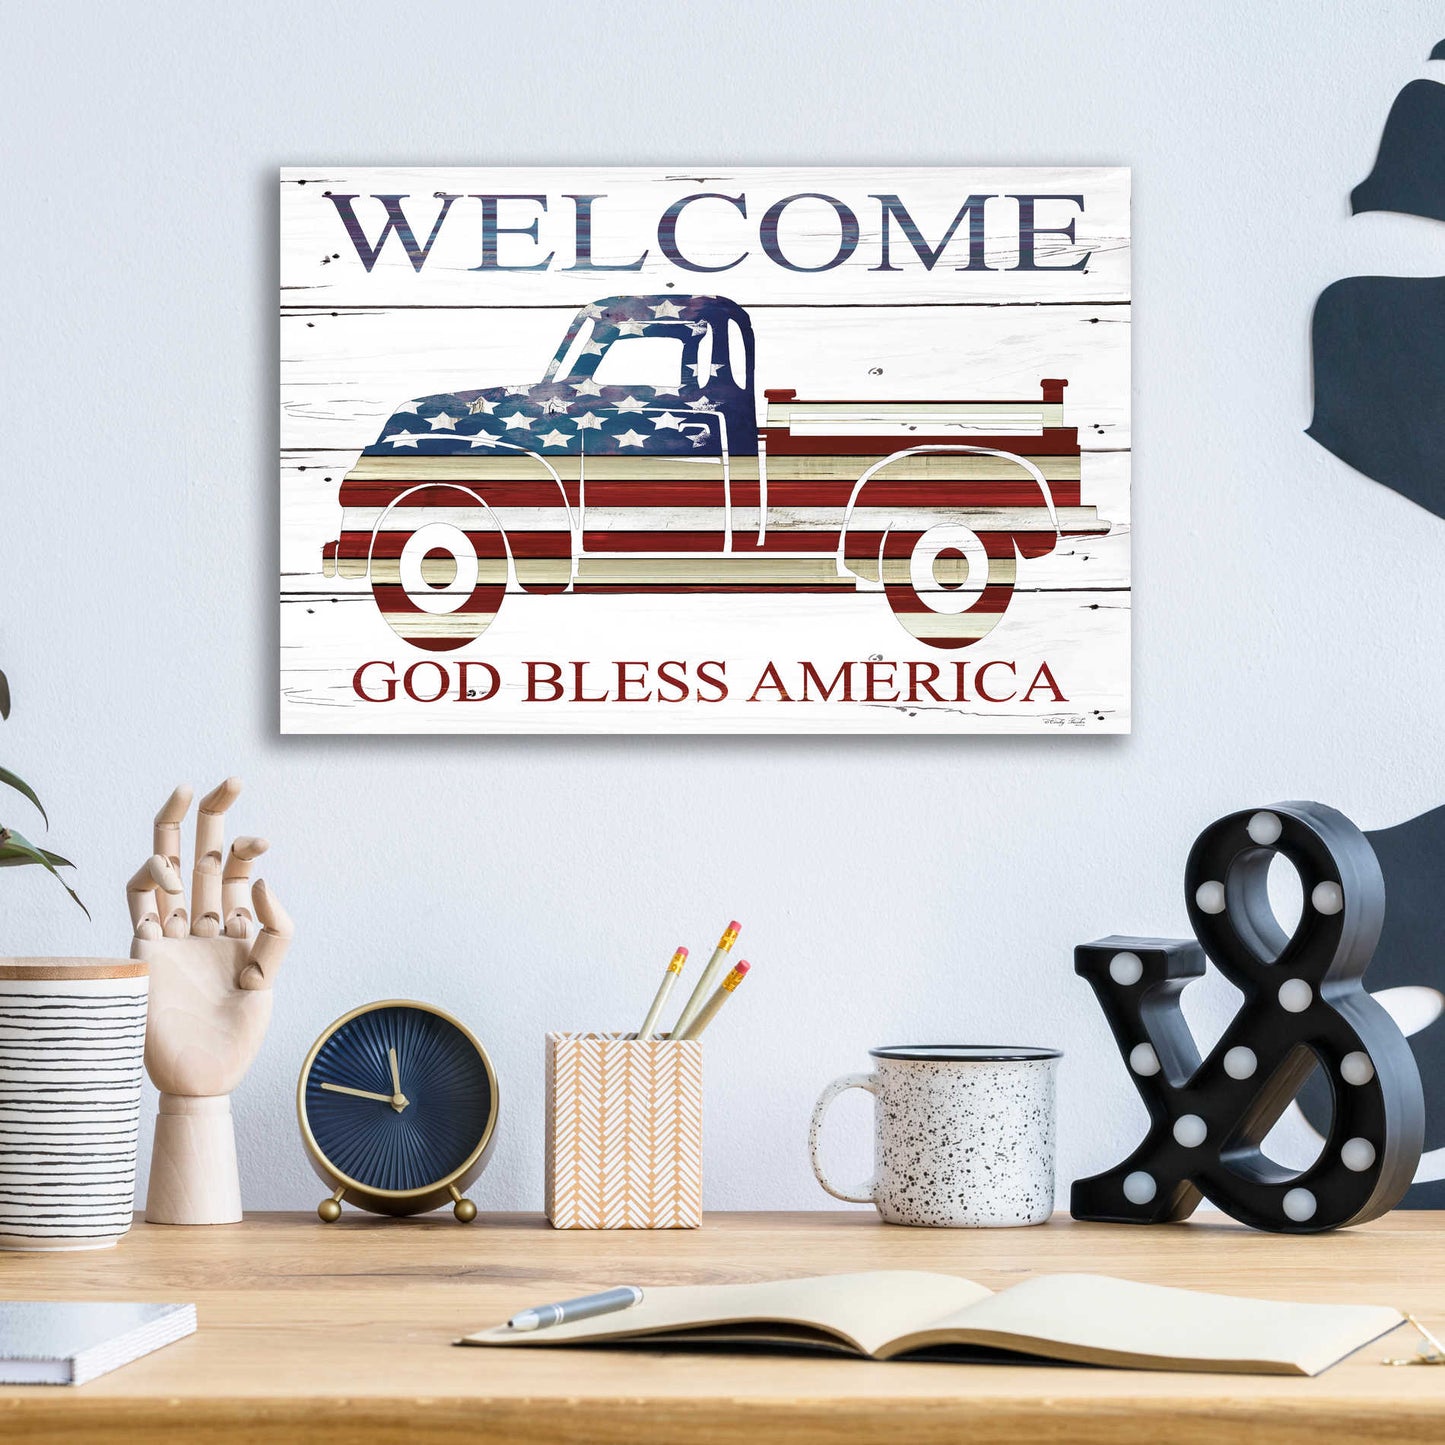 Epic Art 'Welcome Patriotic Truck' by Cindy Jacobs, Acrylic Glass Wall Art,16x12